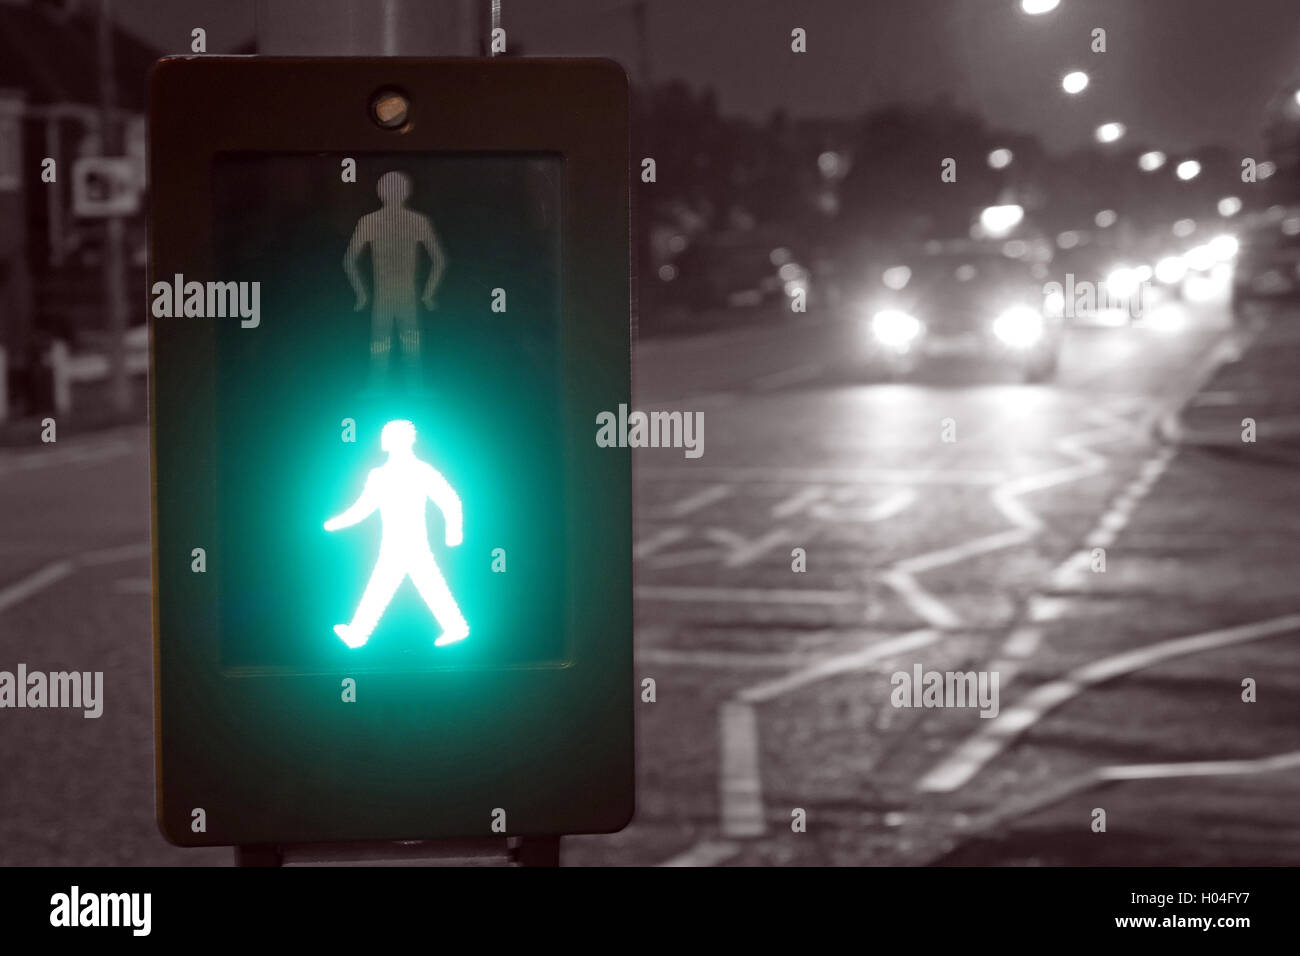 Pelican Crossing, with green man, safe to cross a busy main road, England, UK Stock Photo